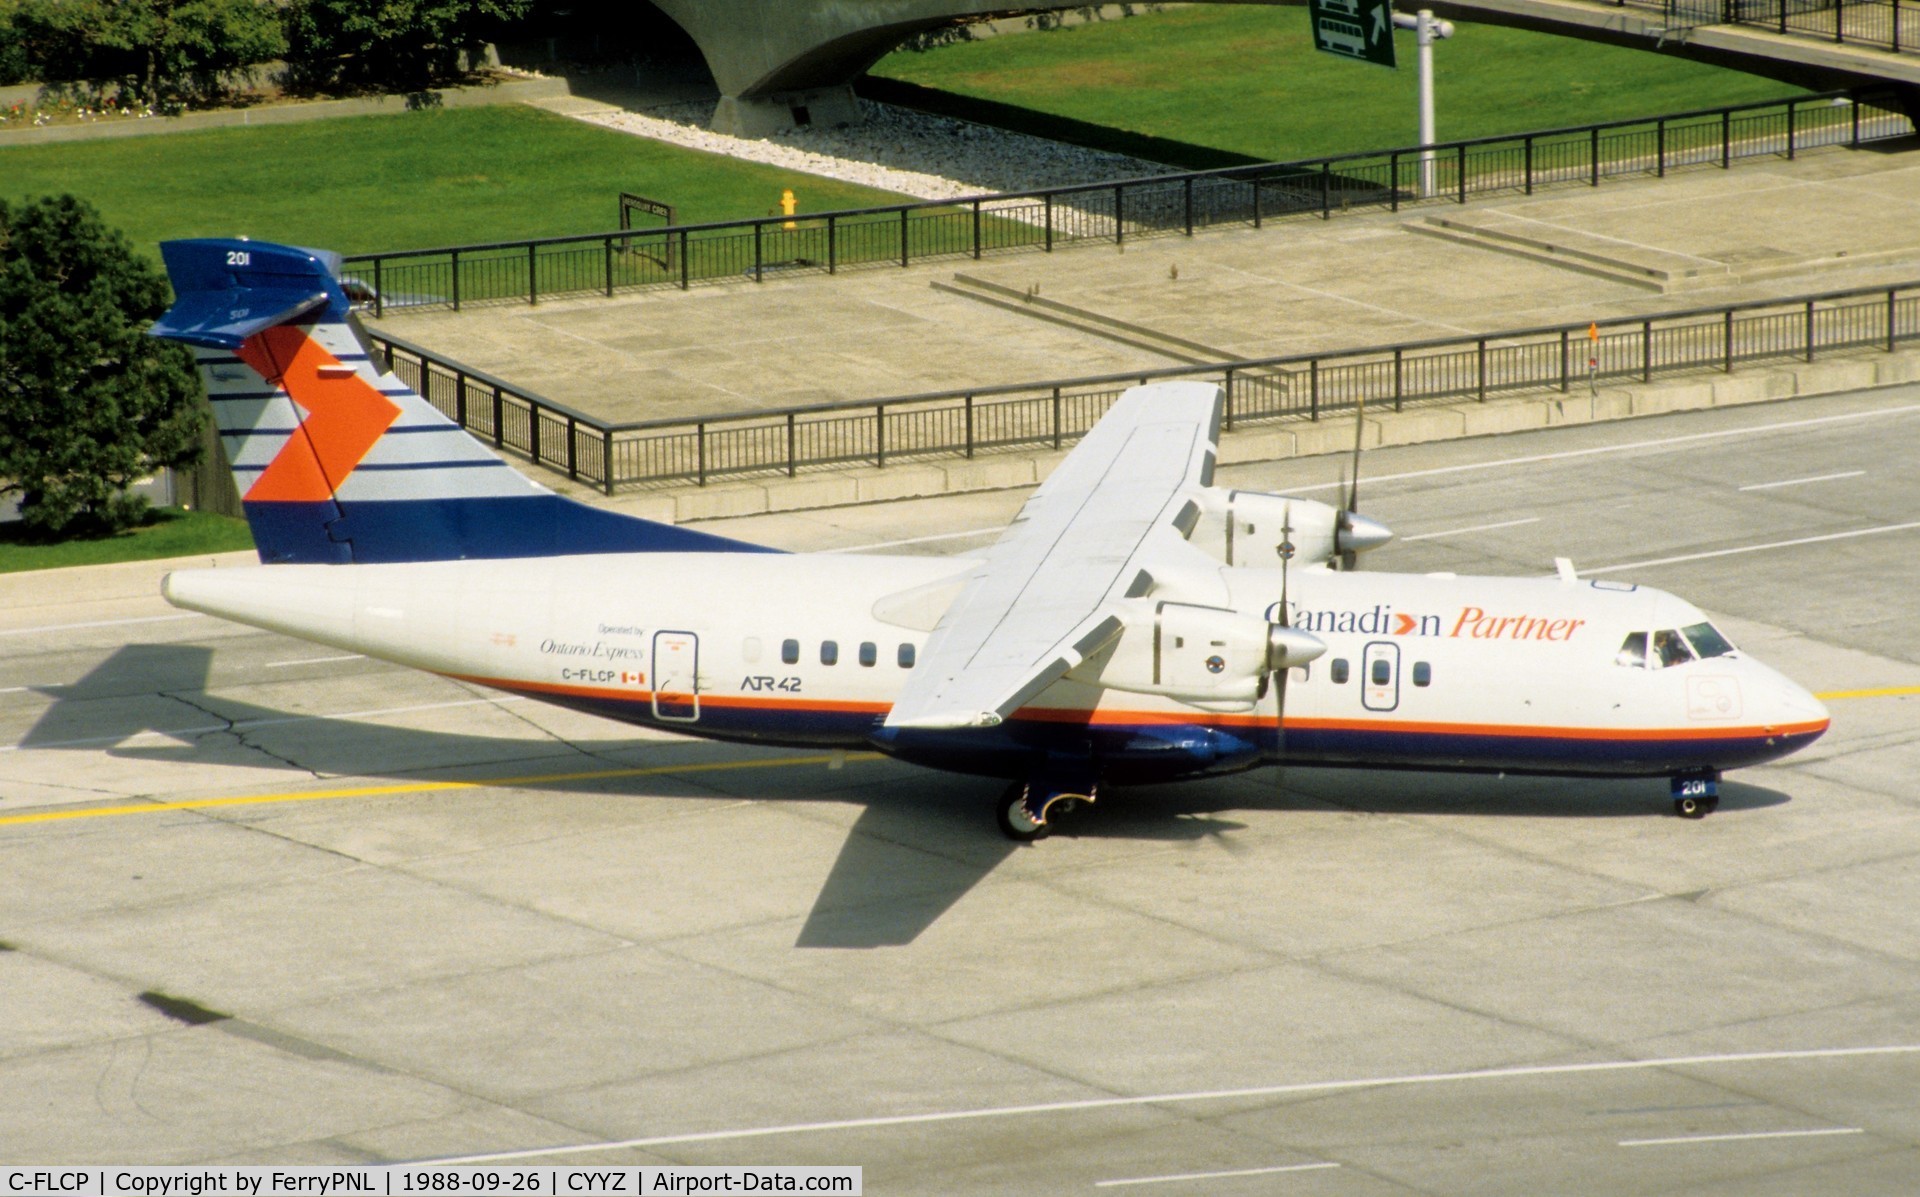 C-FLCP, 1988 ATR 42-312 C/N 085, Canadian Partner Atr42 operated by Ontario Express